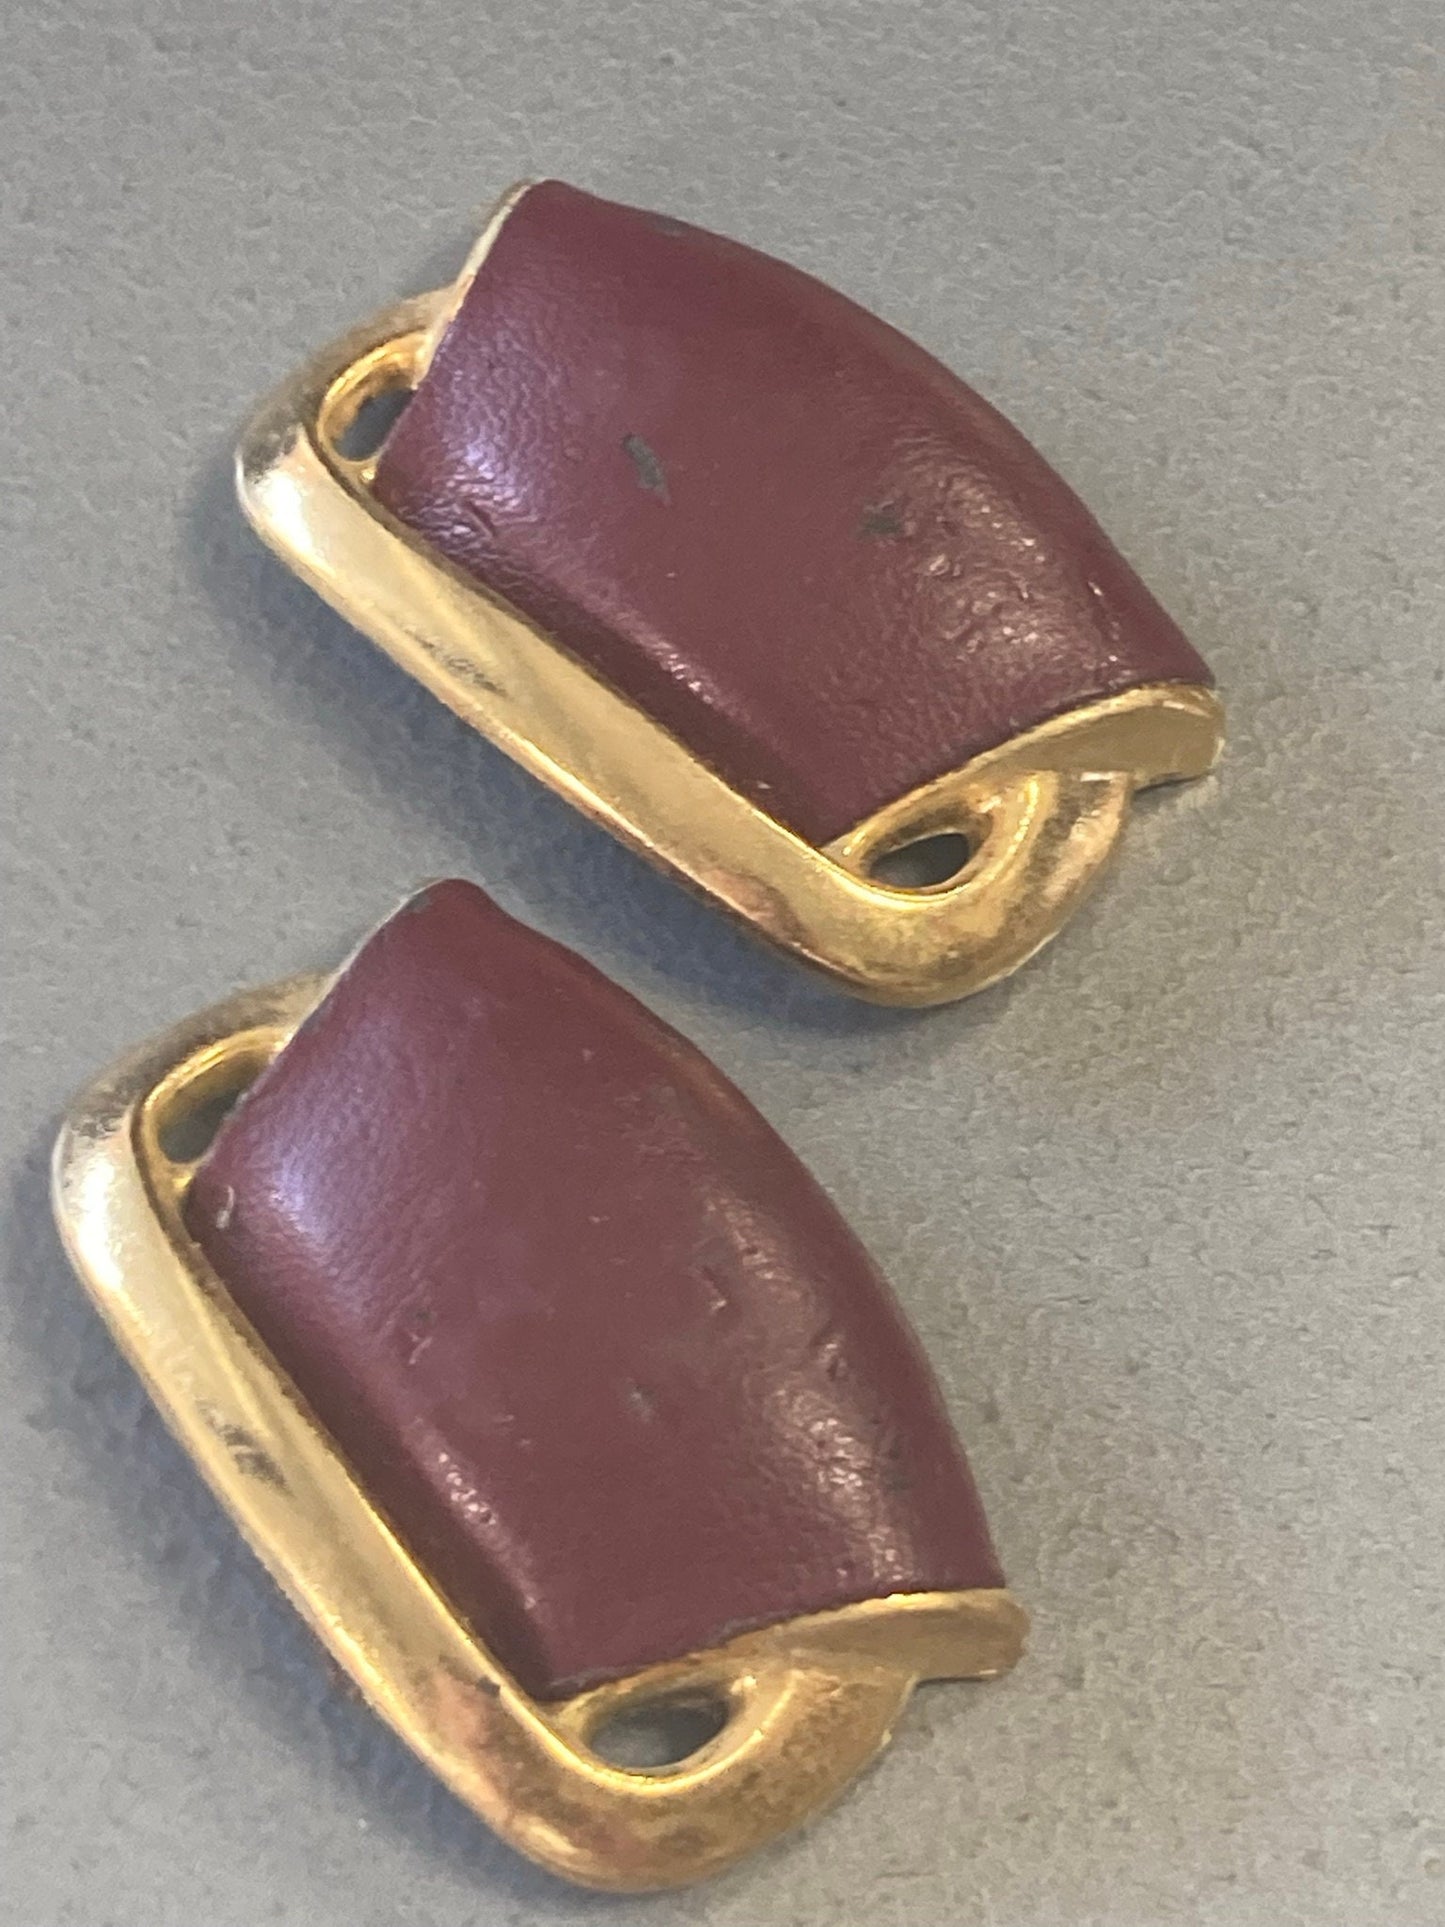 High end pair of Maroon Burgundy Oxblood red leather and gold tone shoe clips